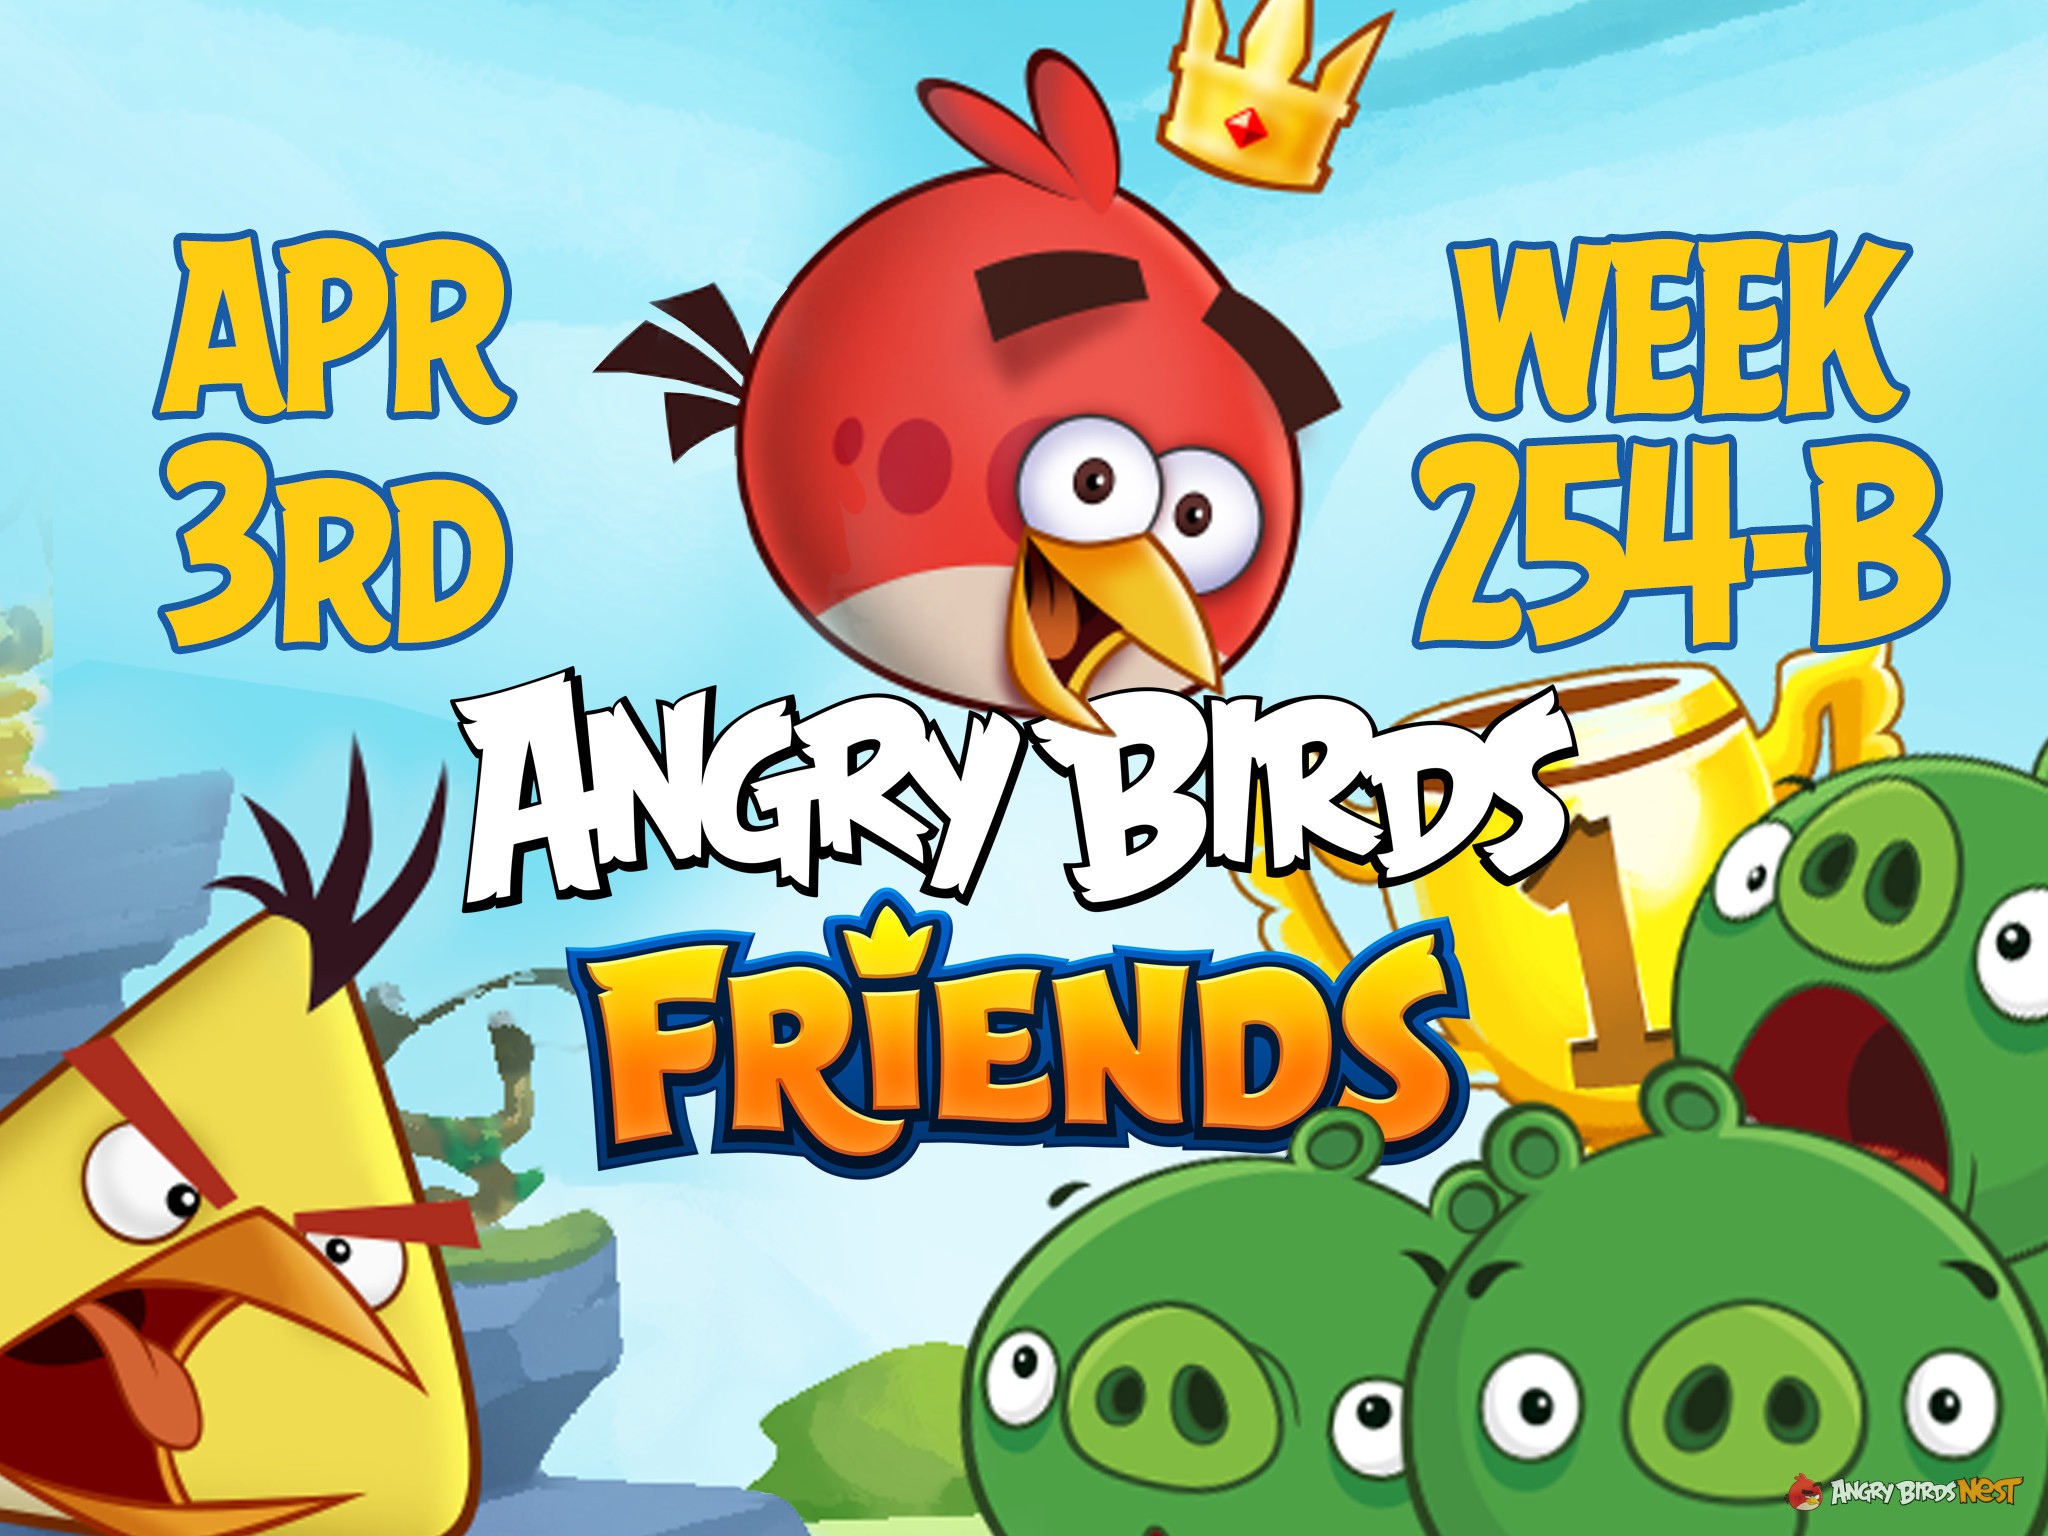 Angry Birds Friends Tournament Week 254-B Feature Image